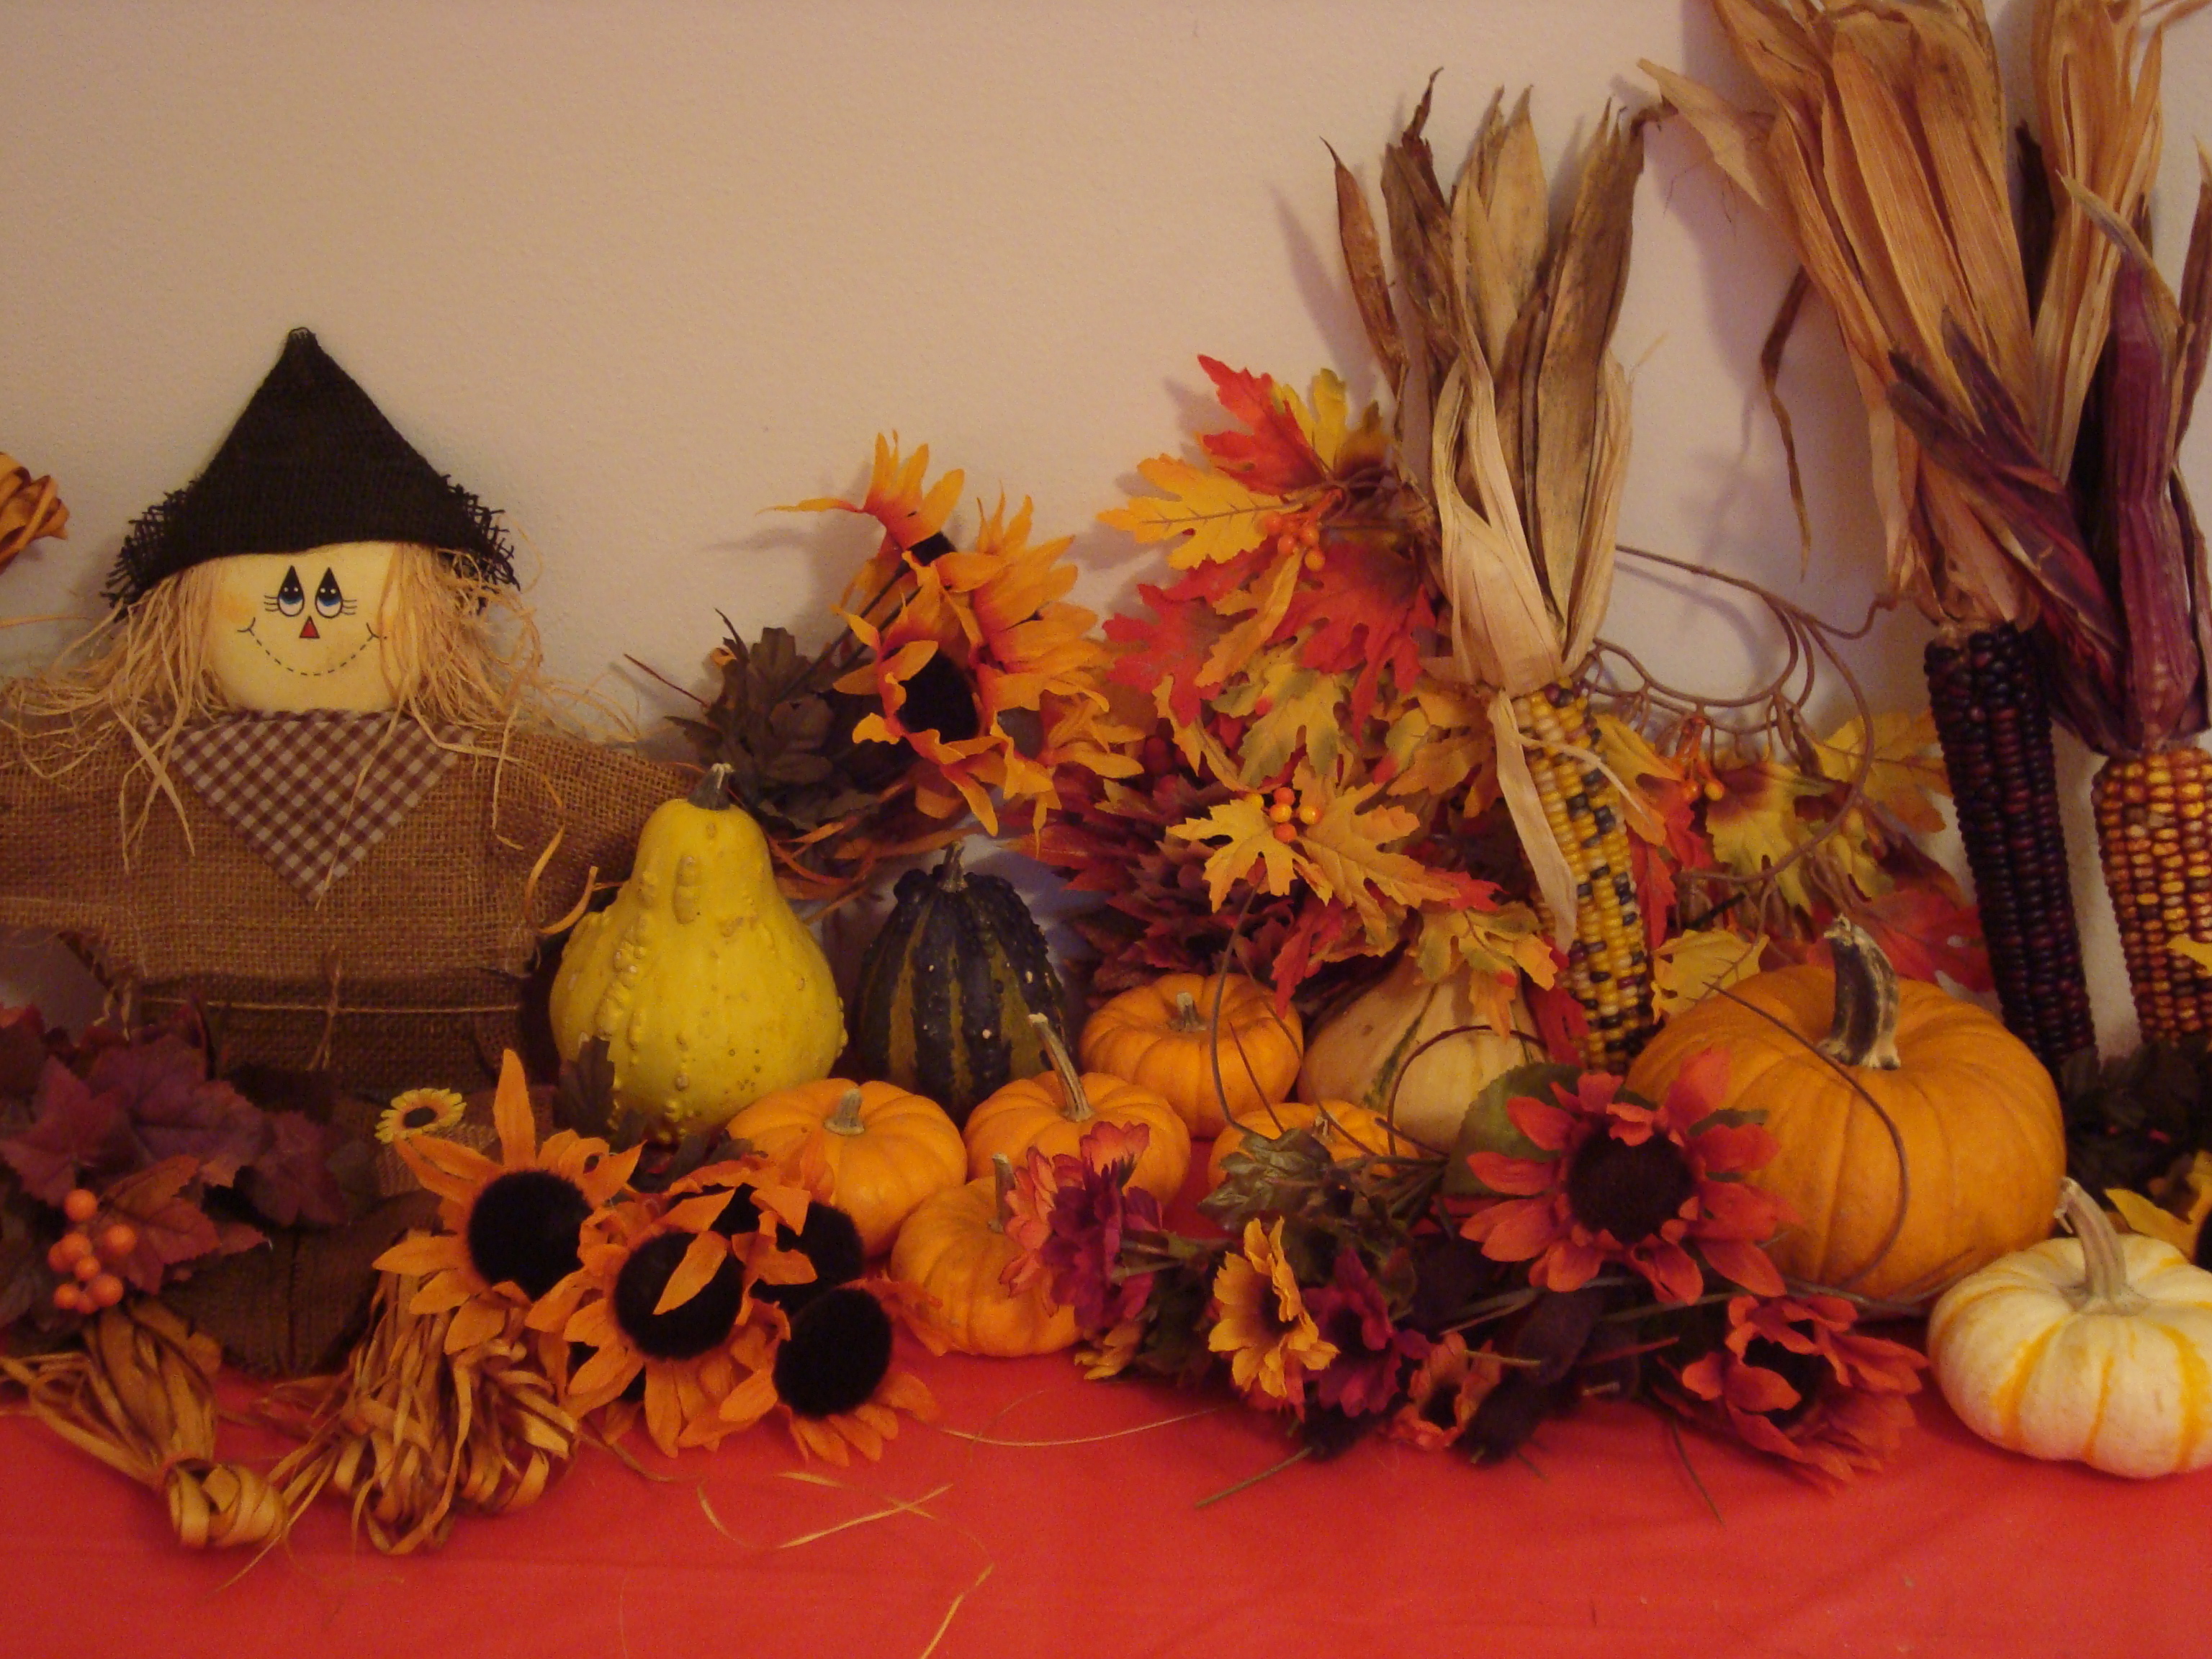 A Few of My Favorite Fall Things